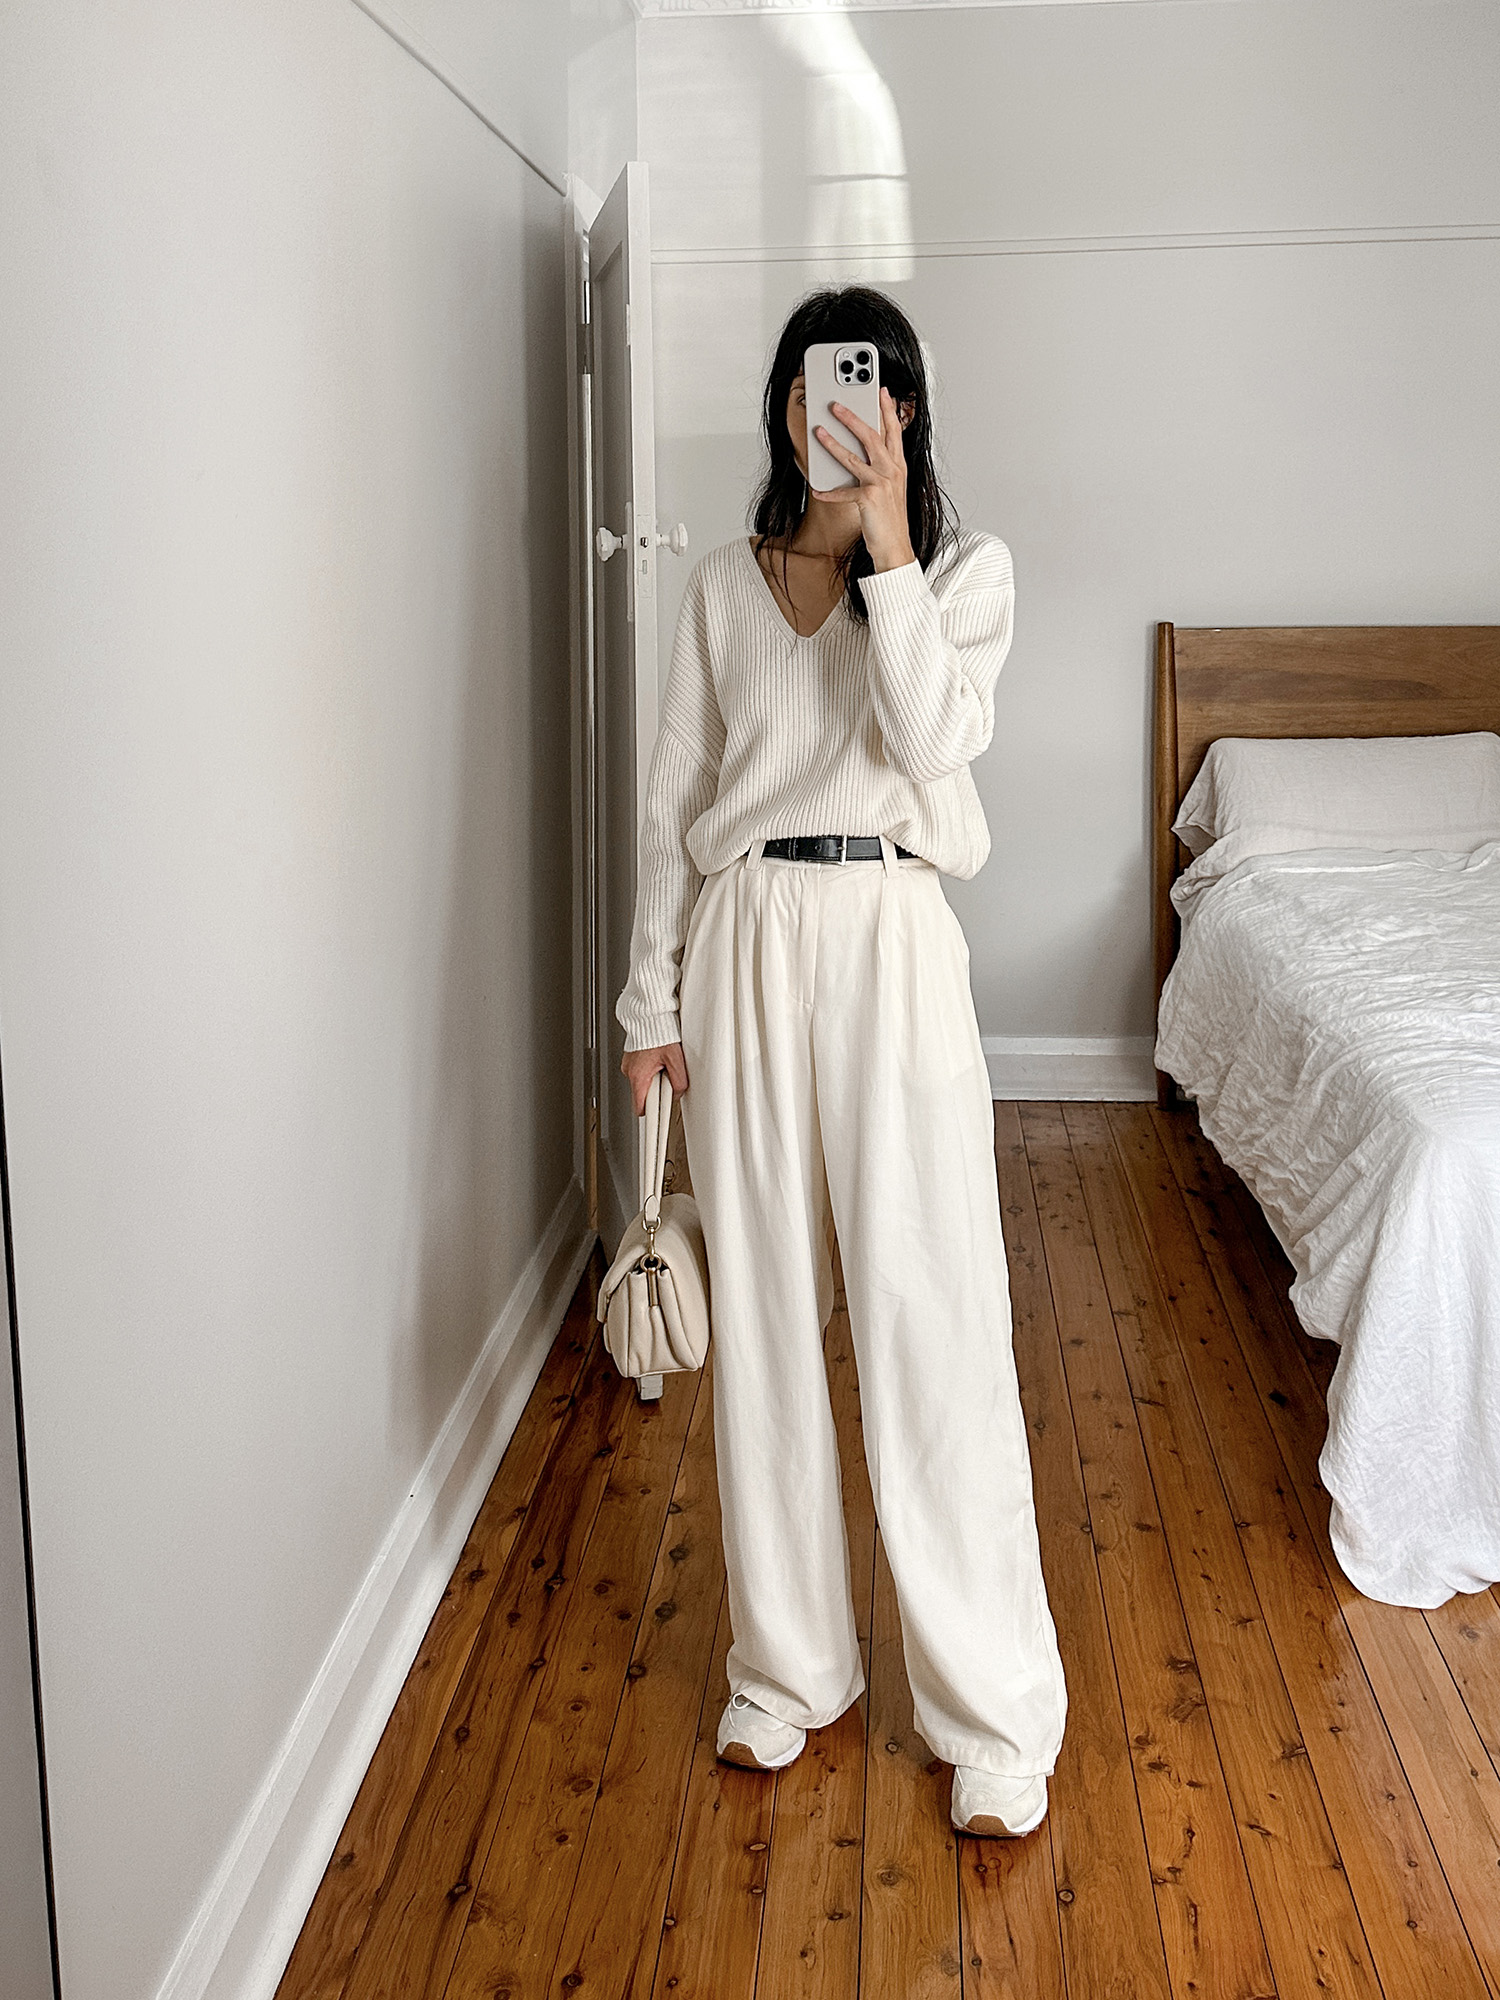 Wearing Jenni Kayne cabin sweater with DISSH linen trousers and New Balance sneakers